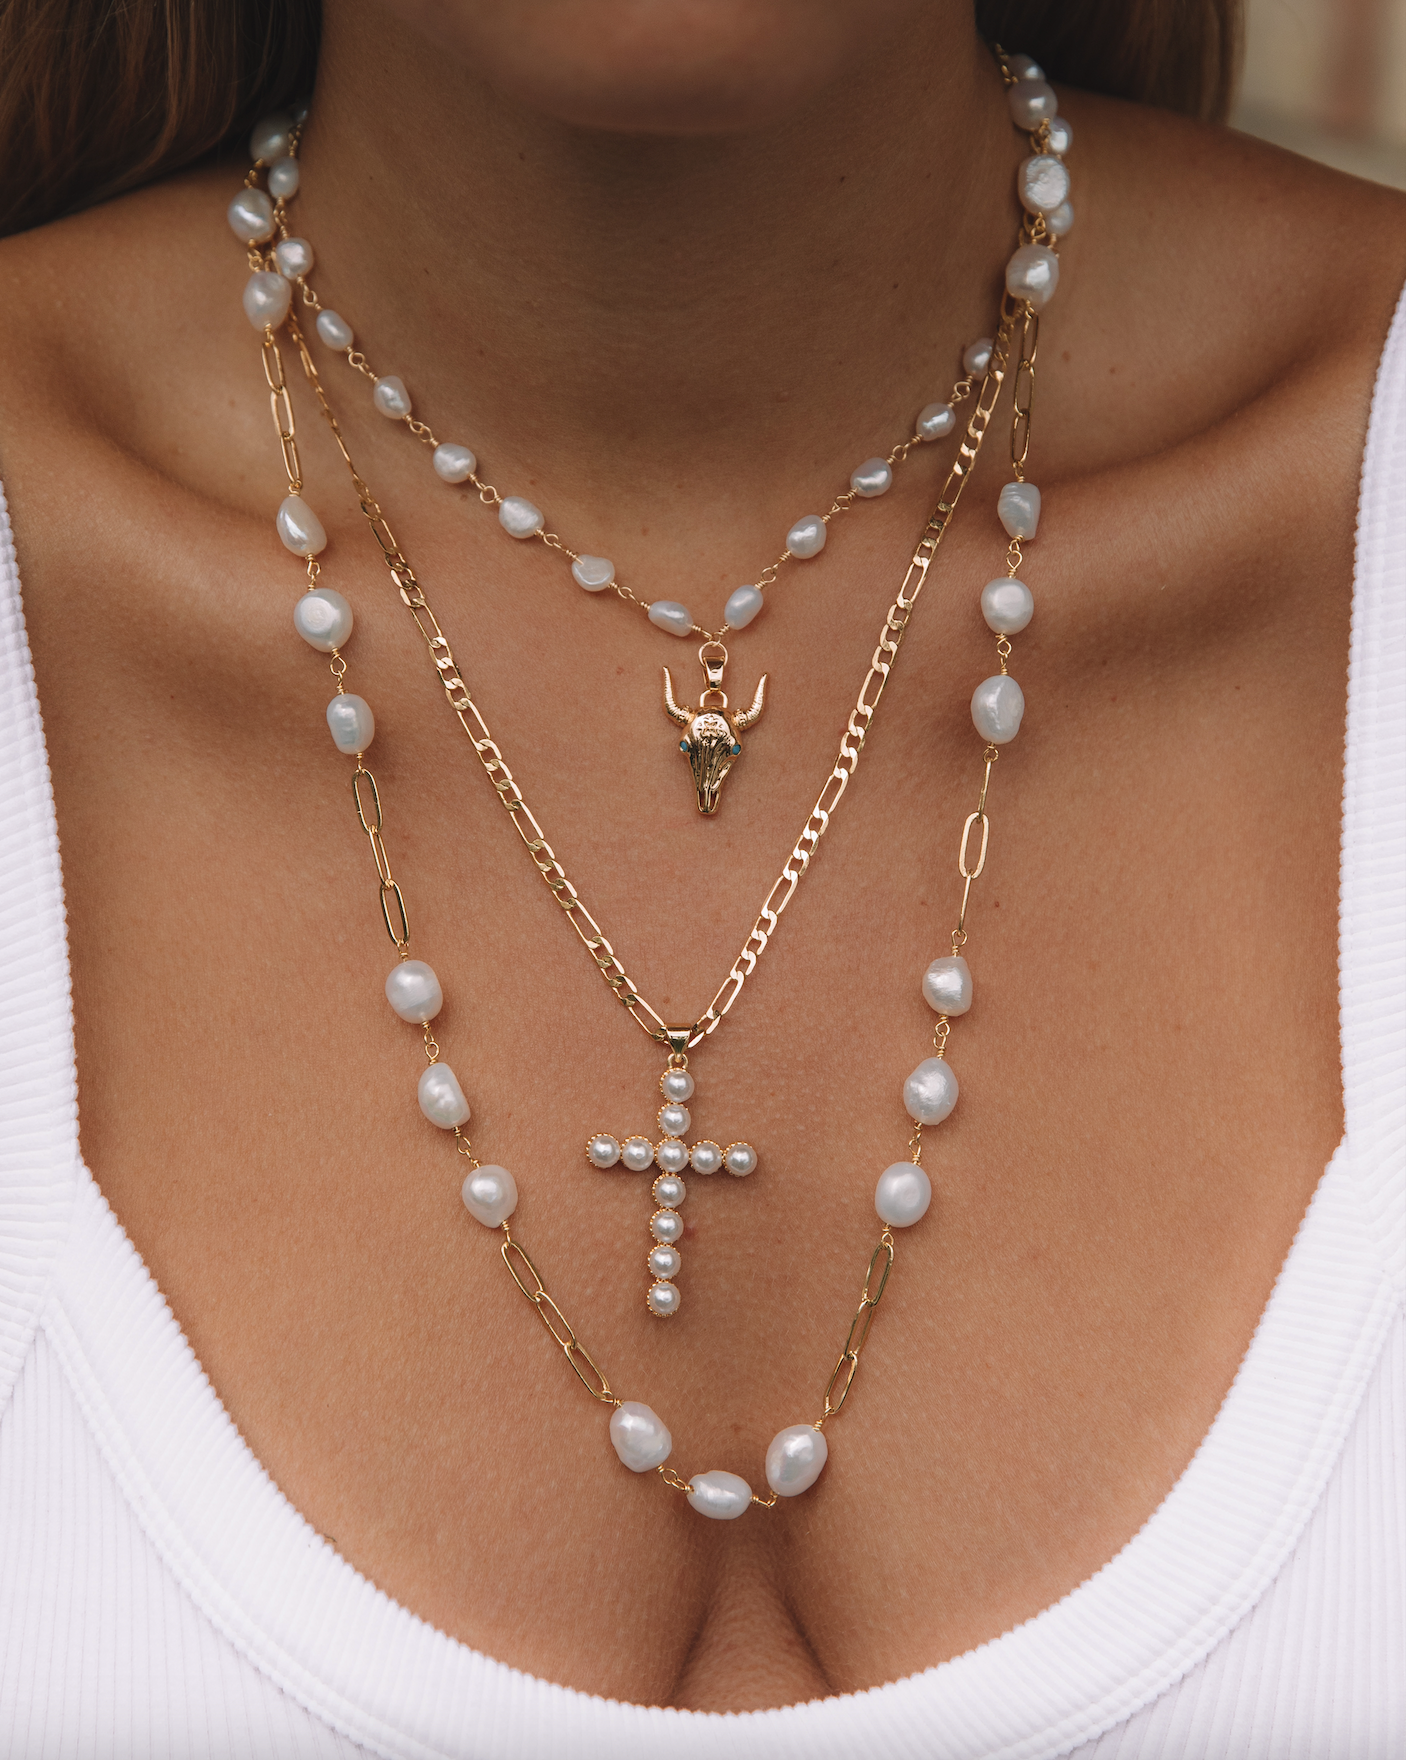 The Festival Cross Necklace